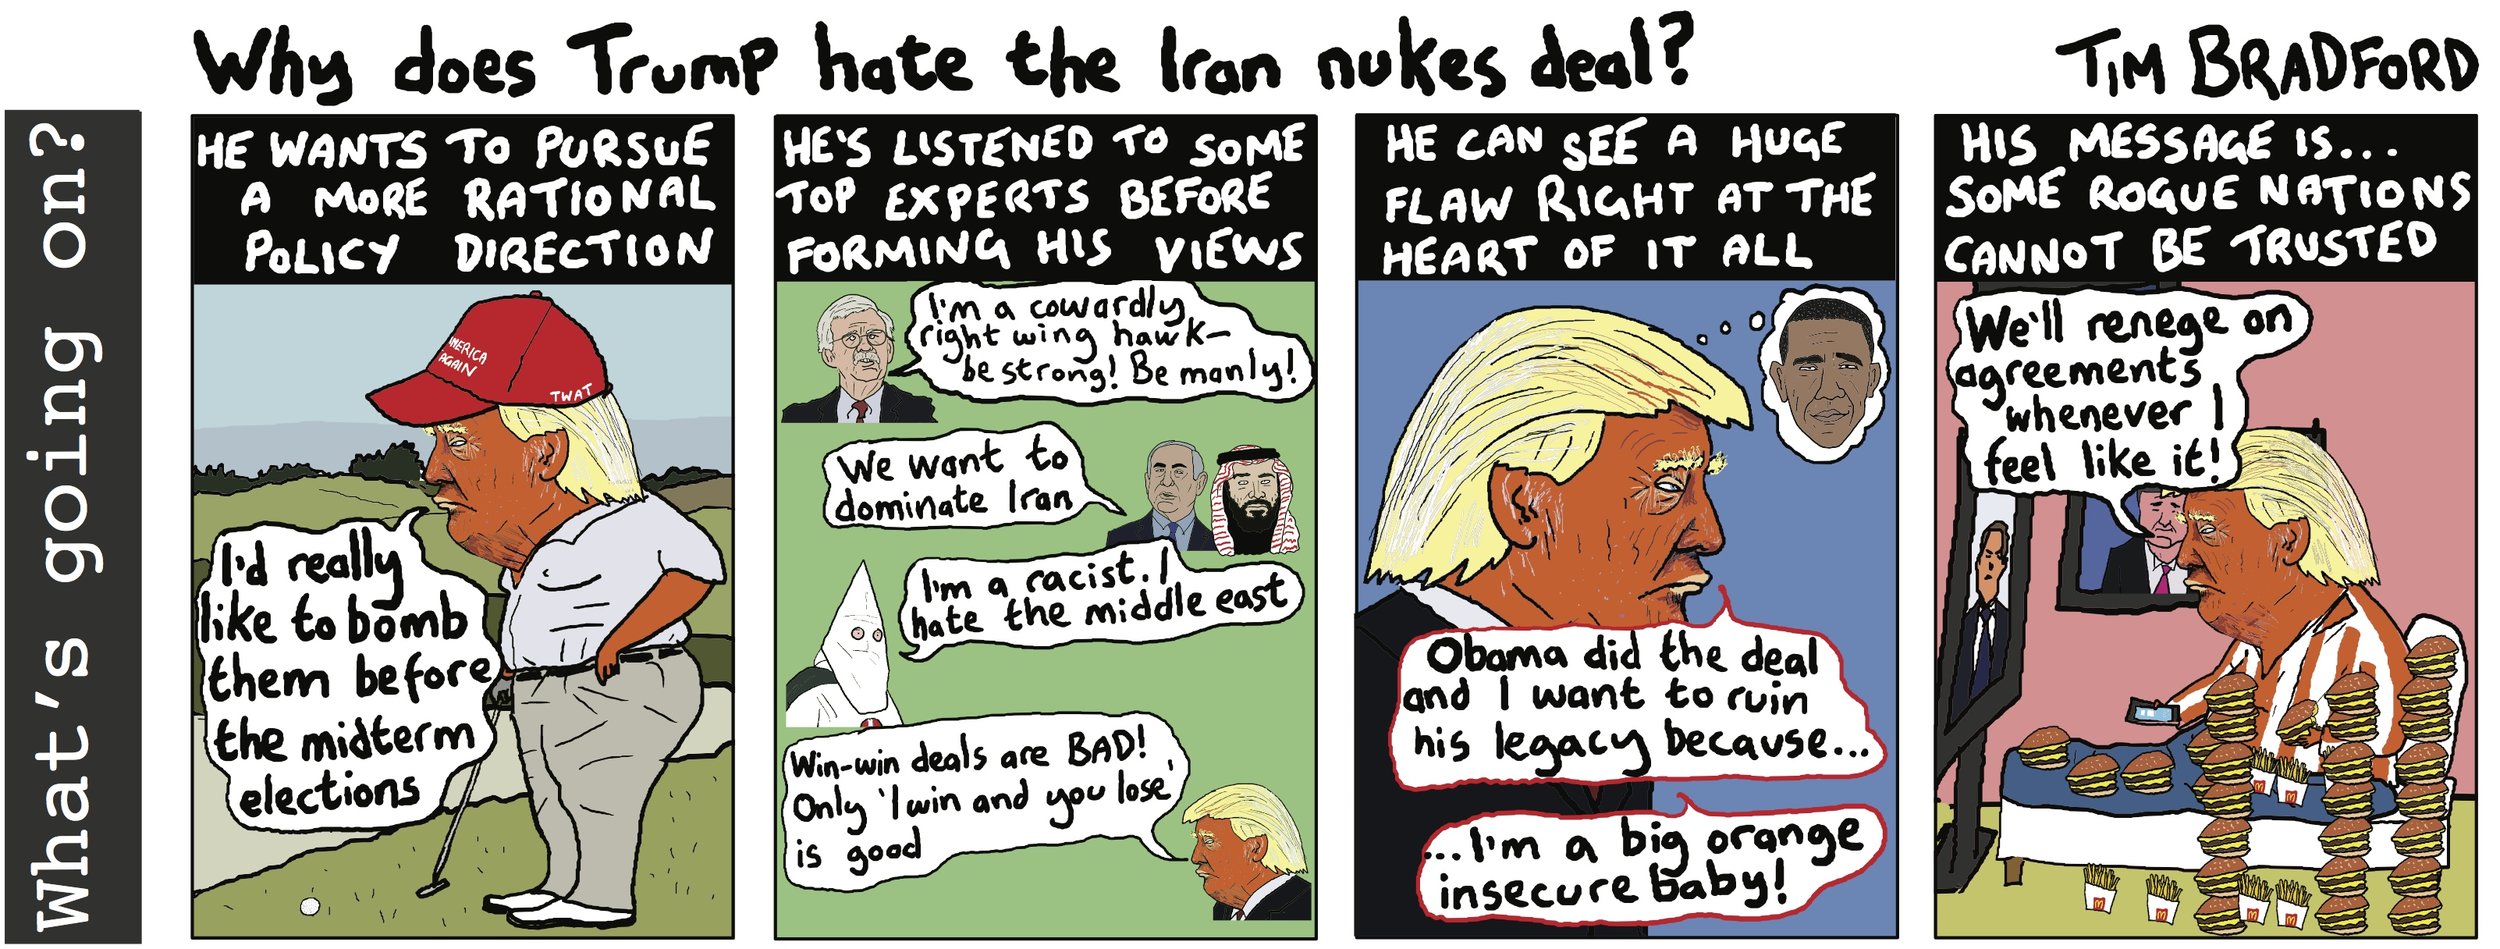 Why does Trump hate the Iran nukes deal? - 08/05/2018